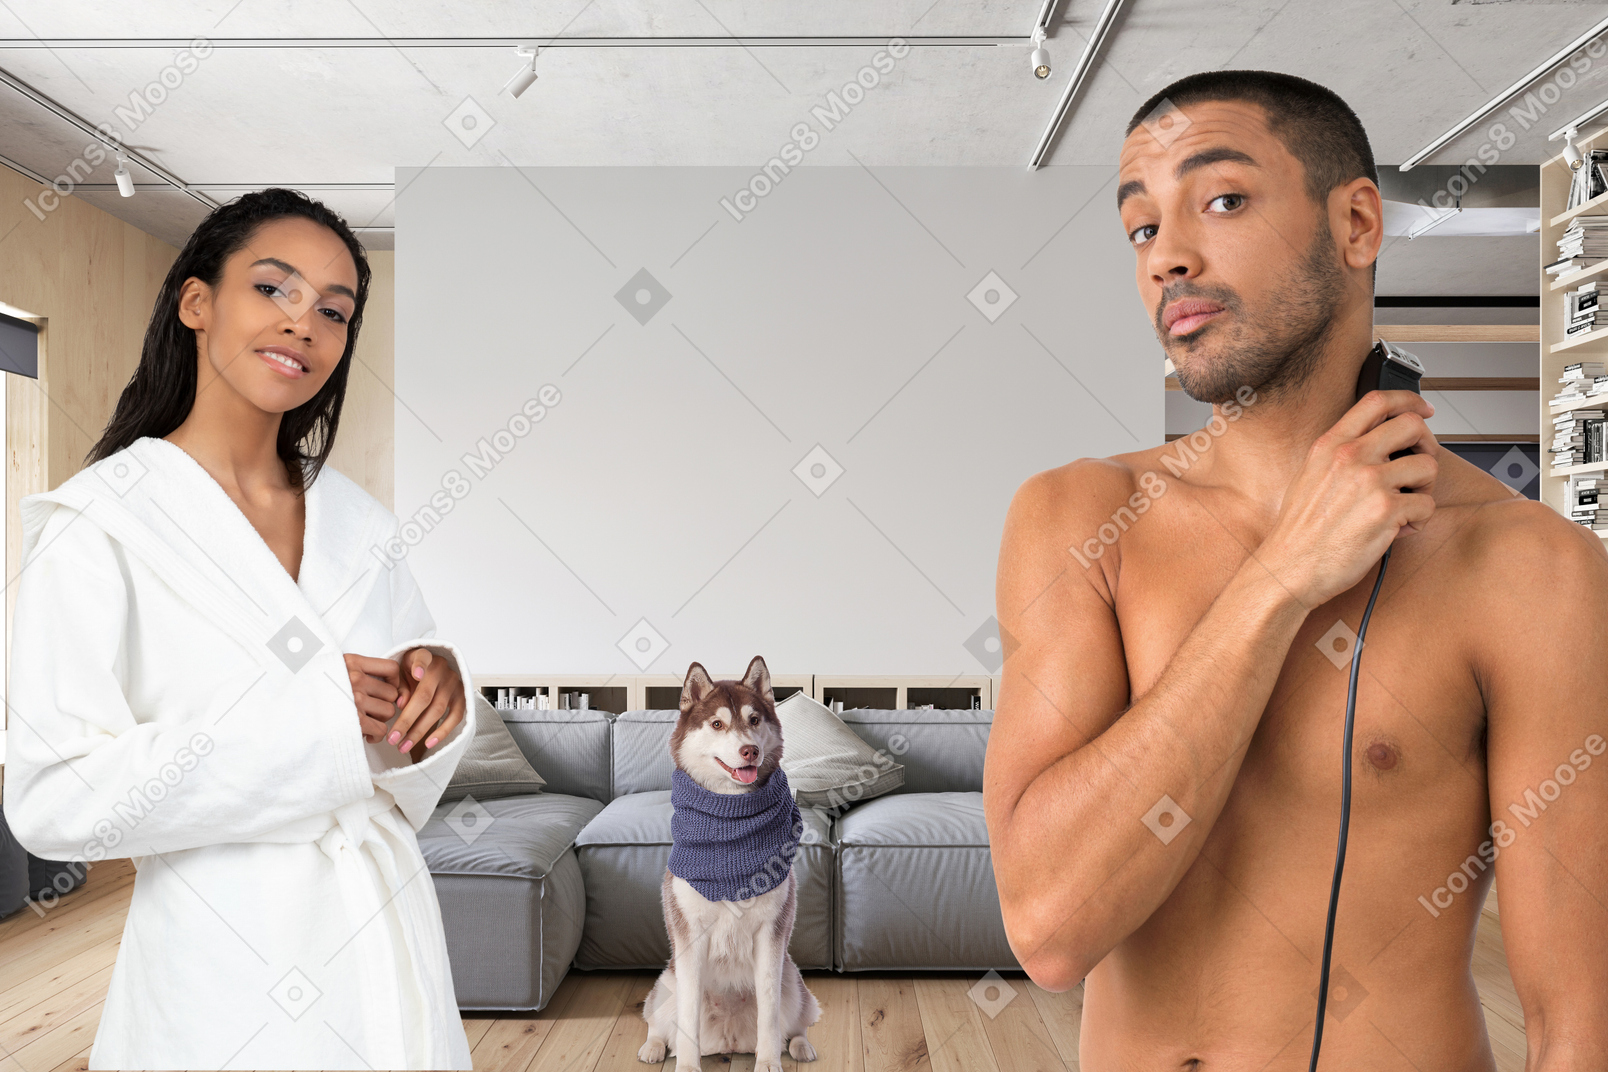 A man and woman are standing in a living room with a husky dog